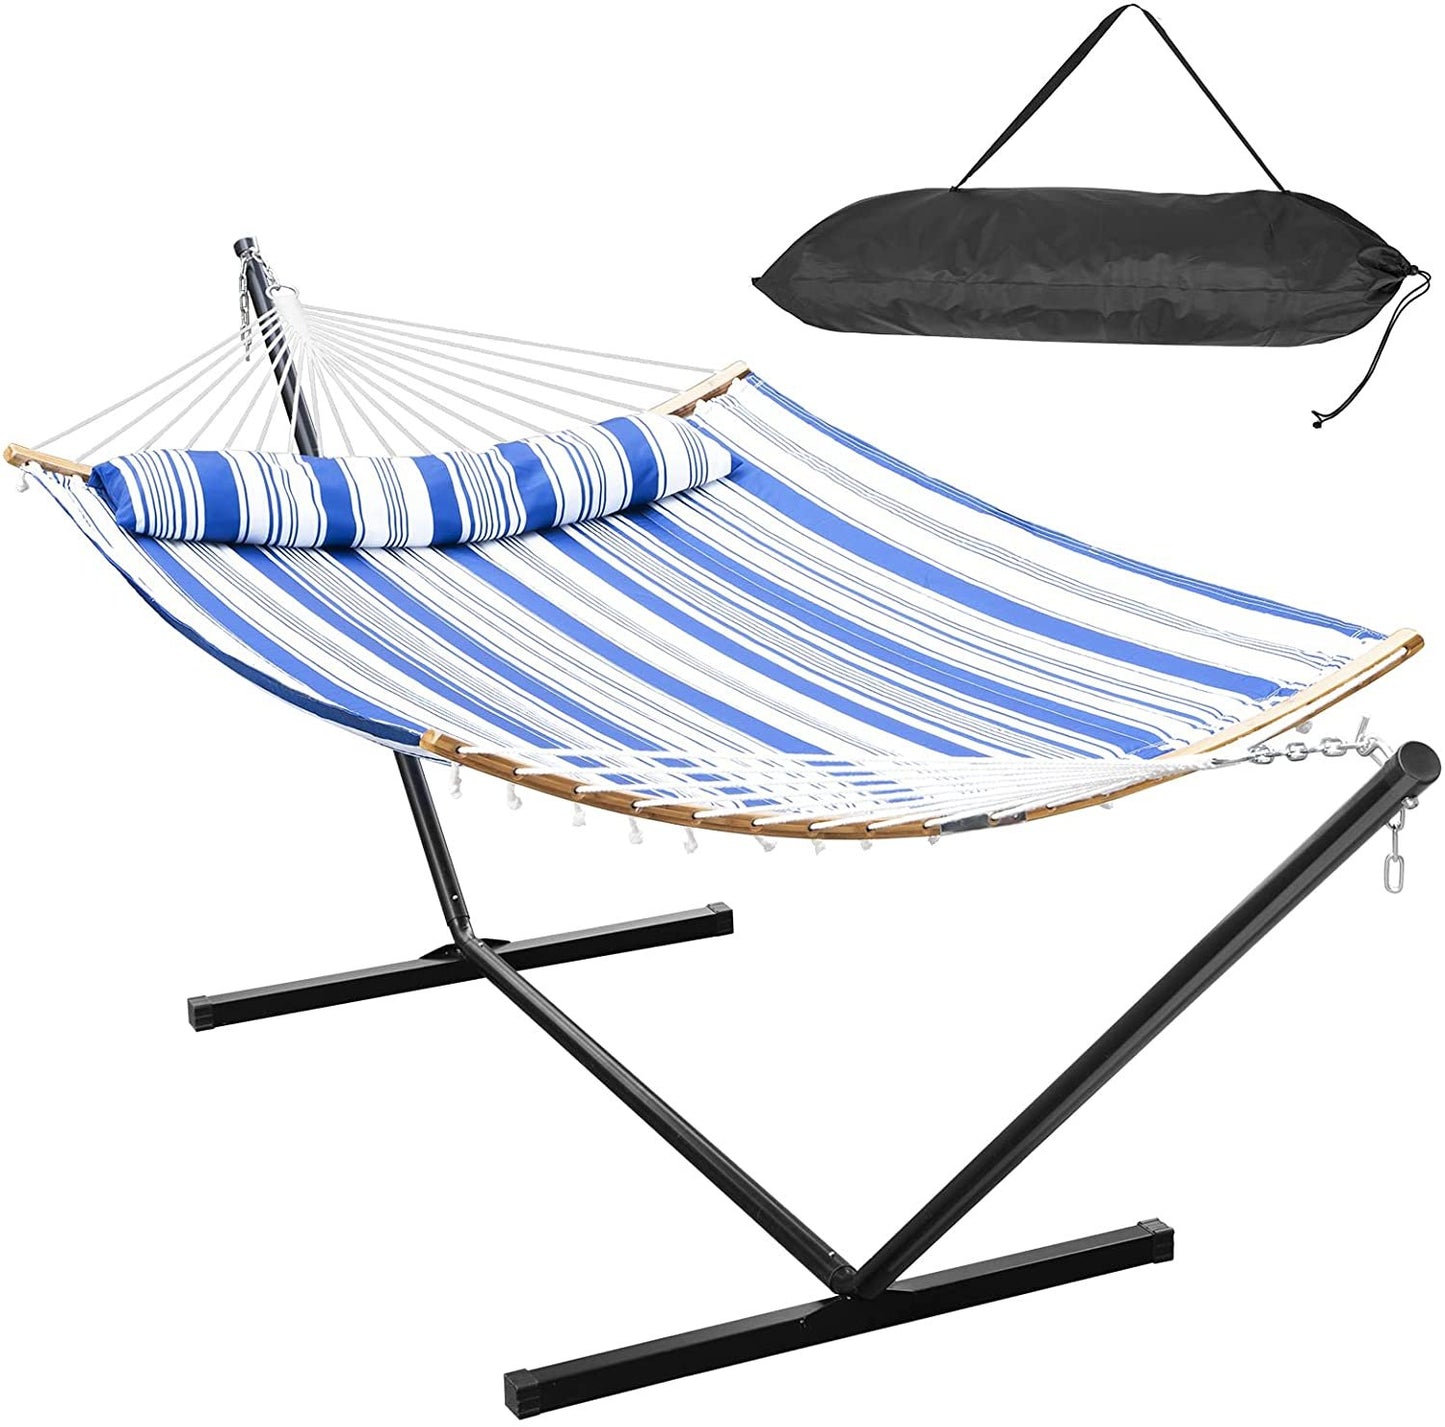 12ft portable double heavy duty hammock blue and white stripes